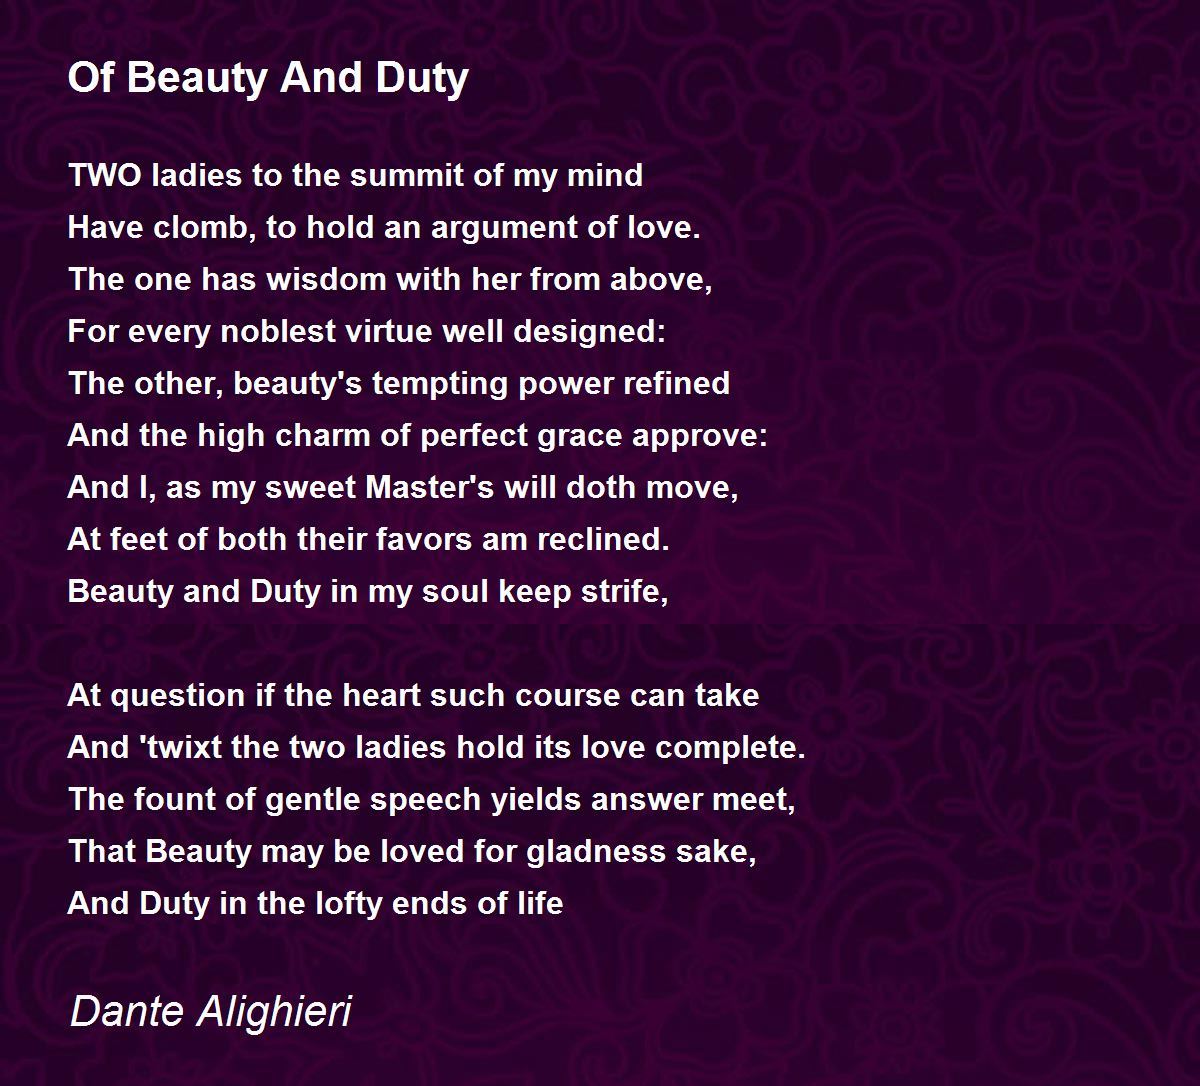 Of Beauty And Duty by Dante Alighieri - Of Beauty And Duty Poem